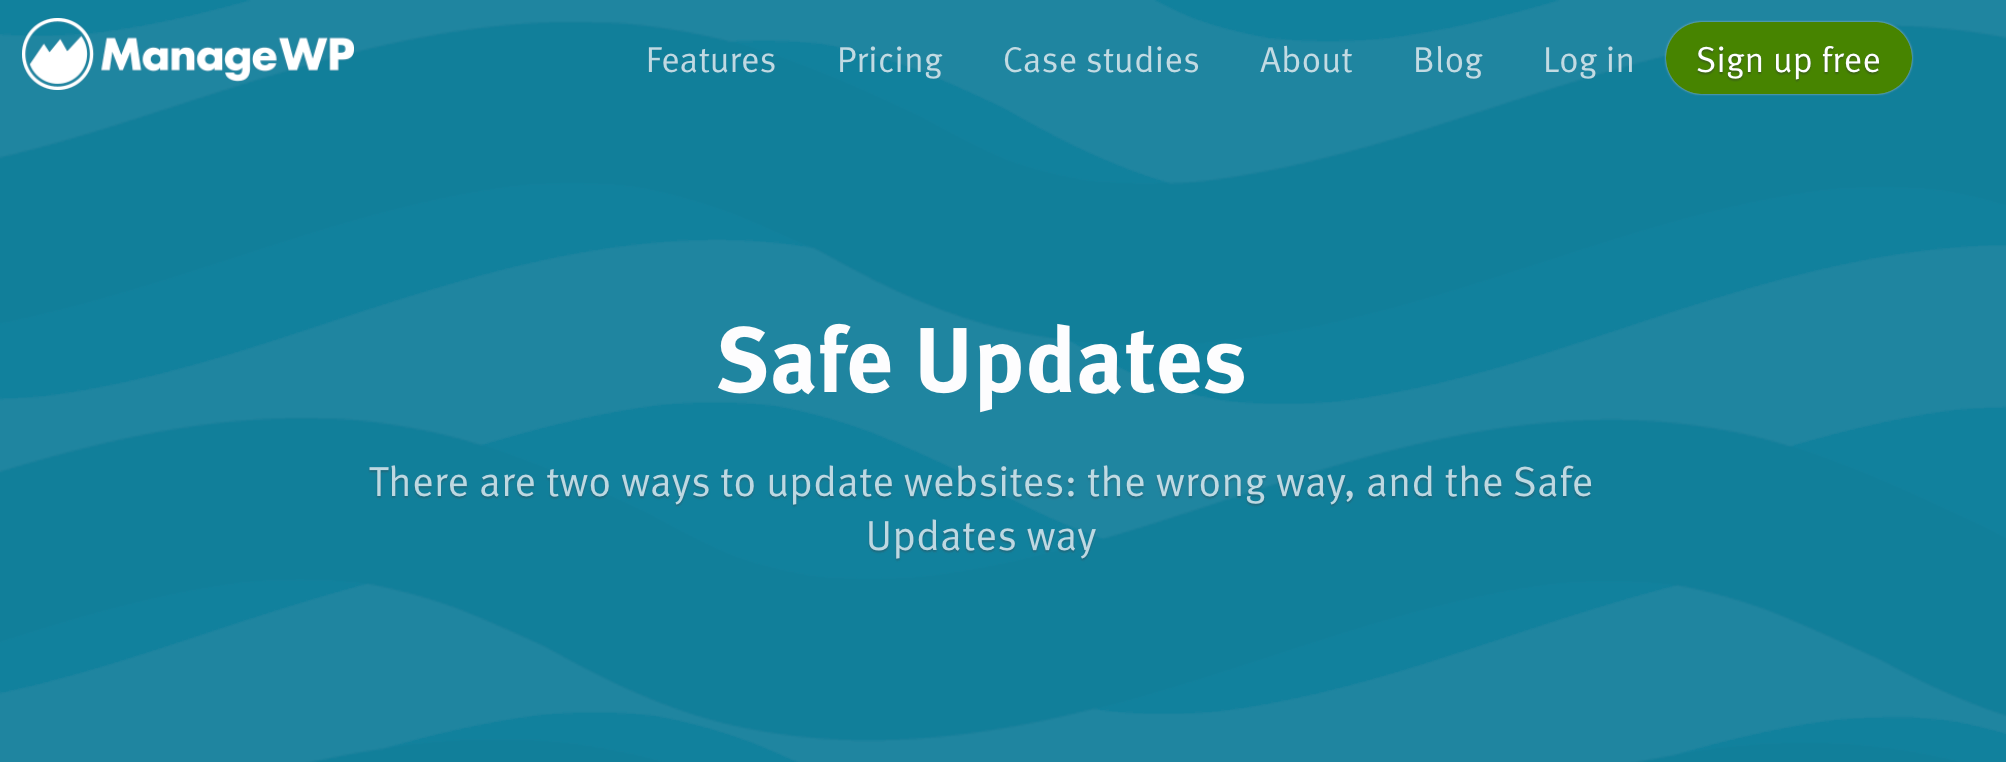 ManageWP's Safe Updates feature.